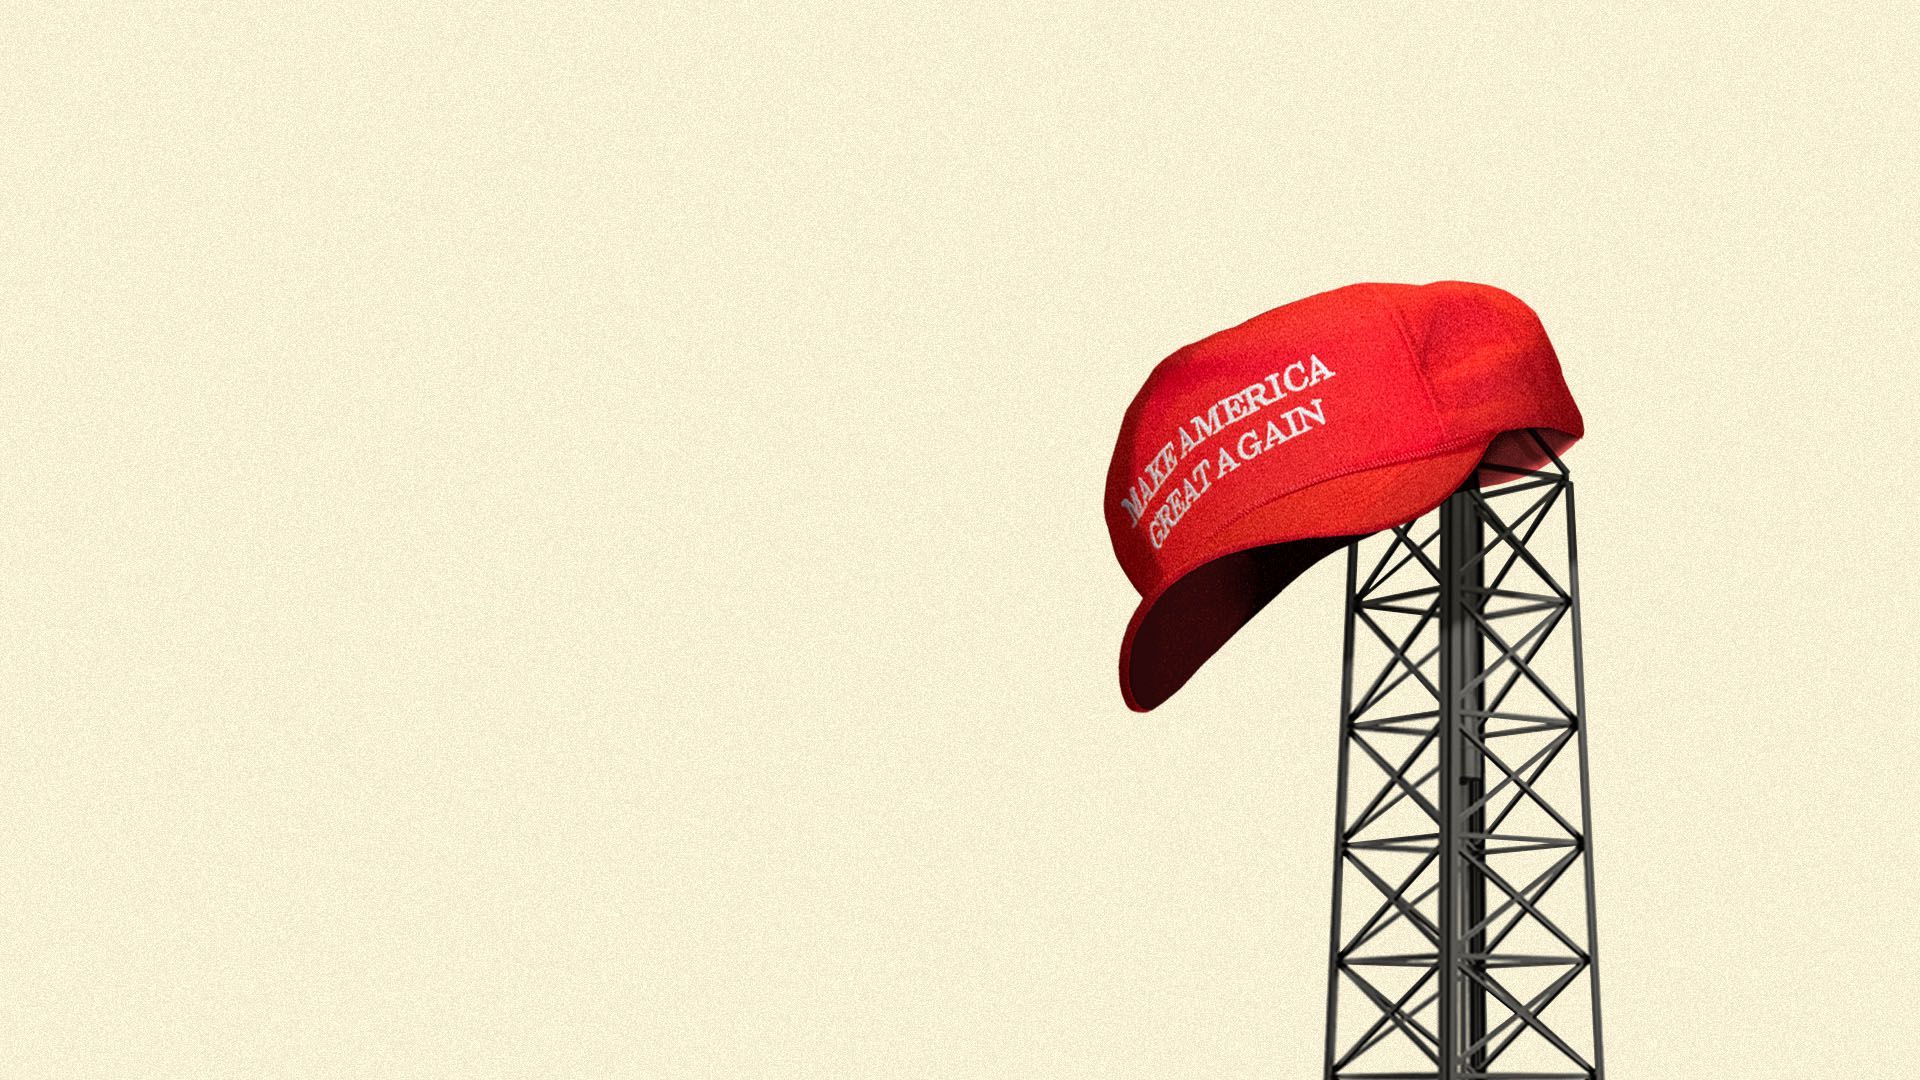 illustration of an oil tower with a MAGA hat on it